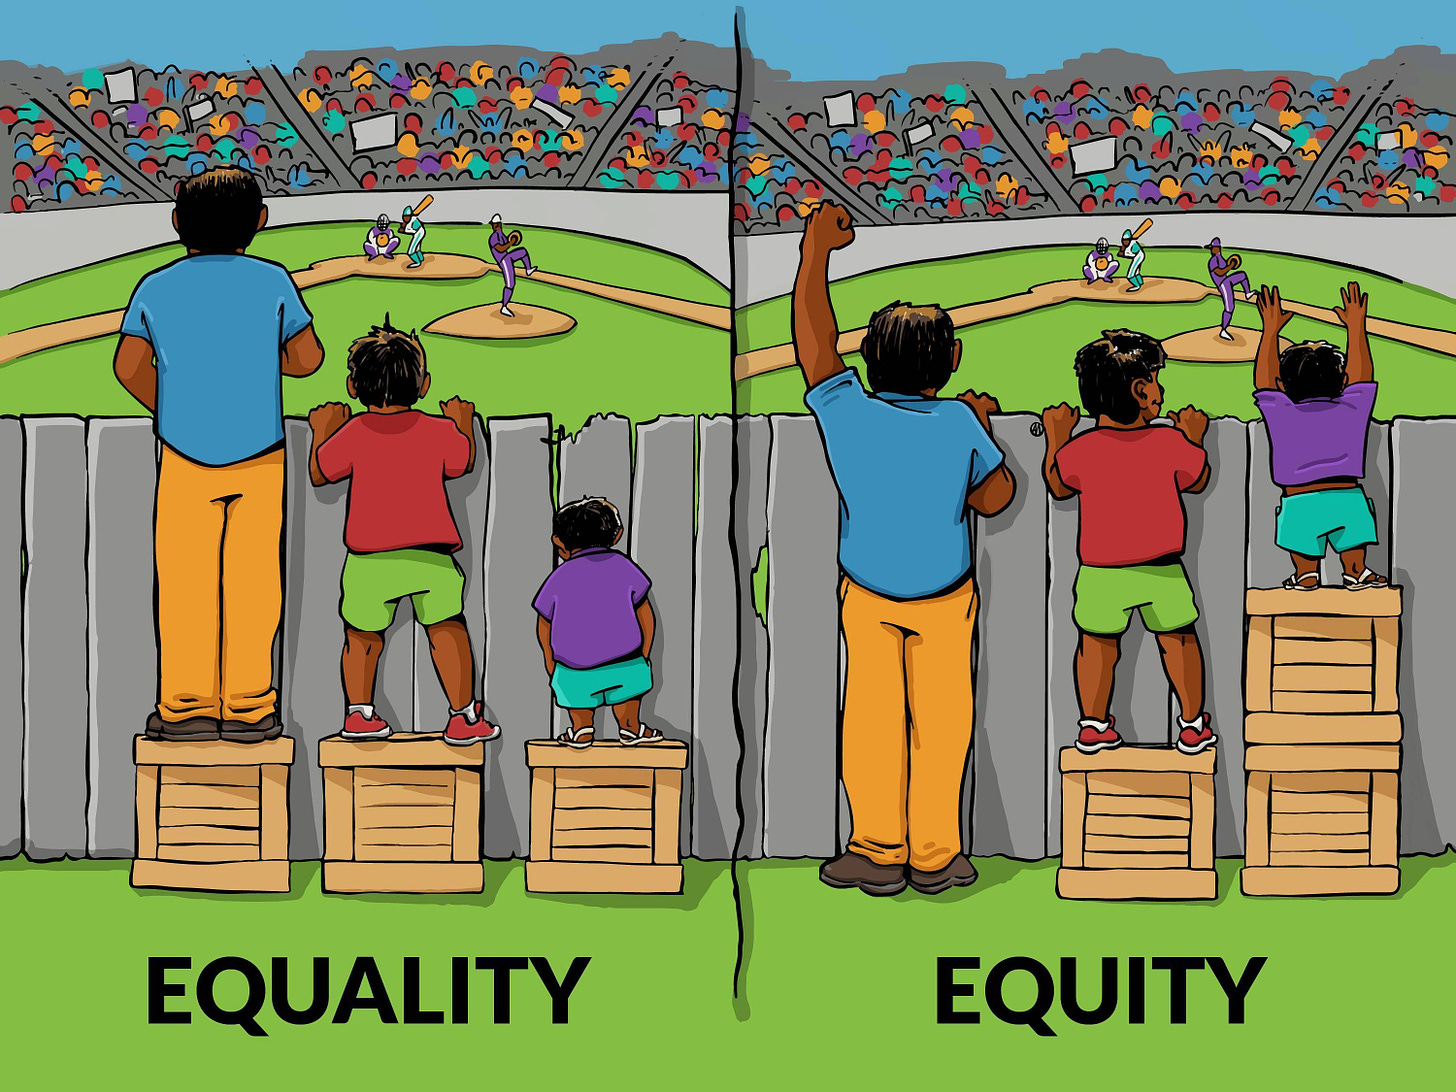 EQUALITY: each person stands on one box, whether or not it helps them see over the wall. EQUITY: each person stands on enough boxes to see over the wall.